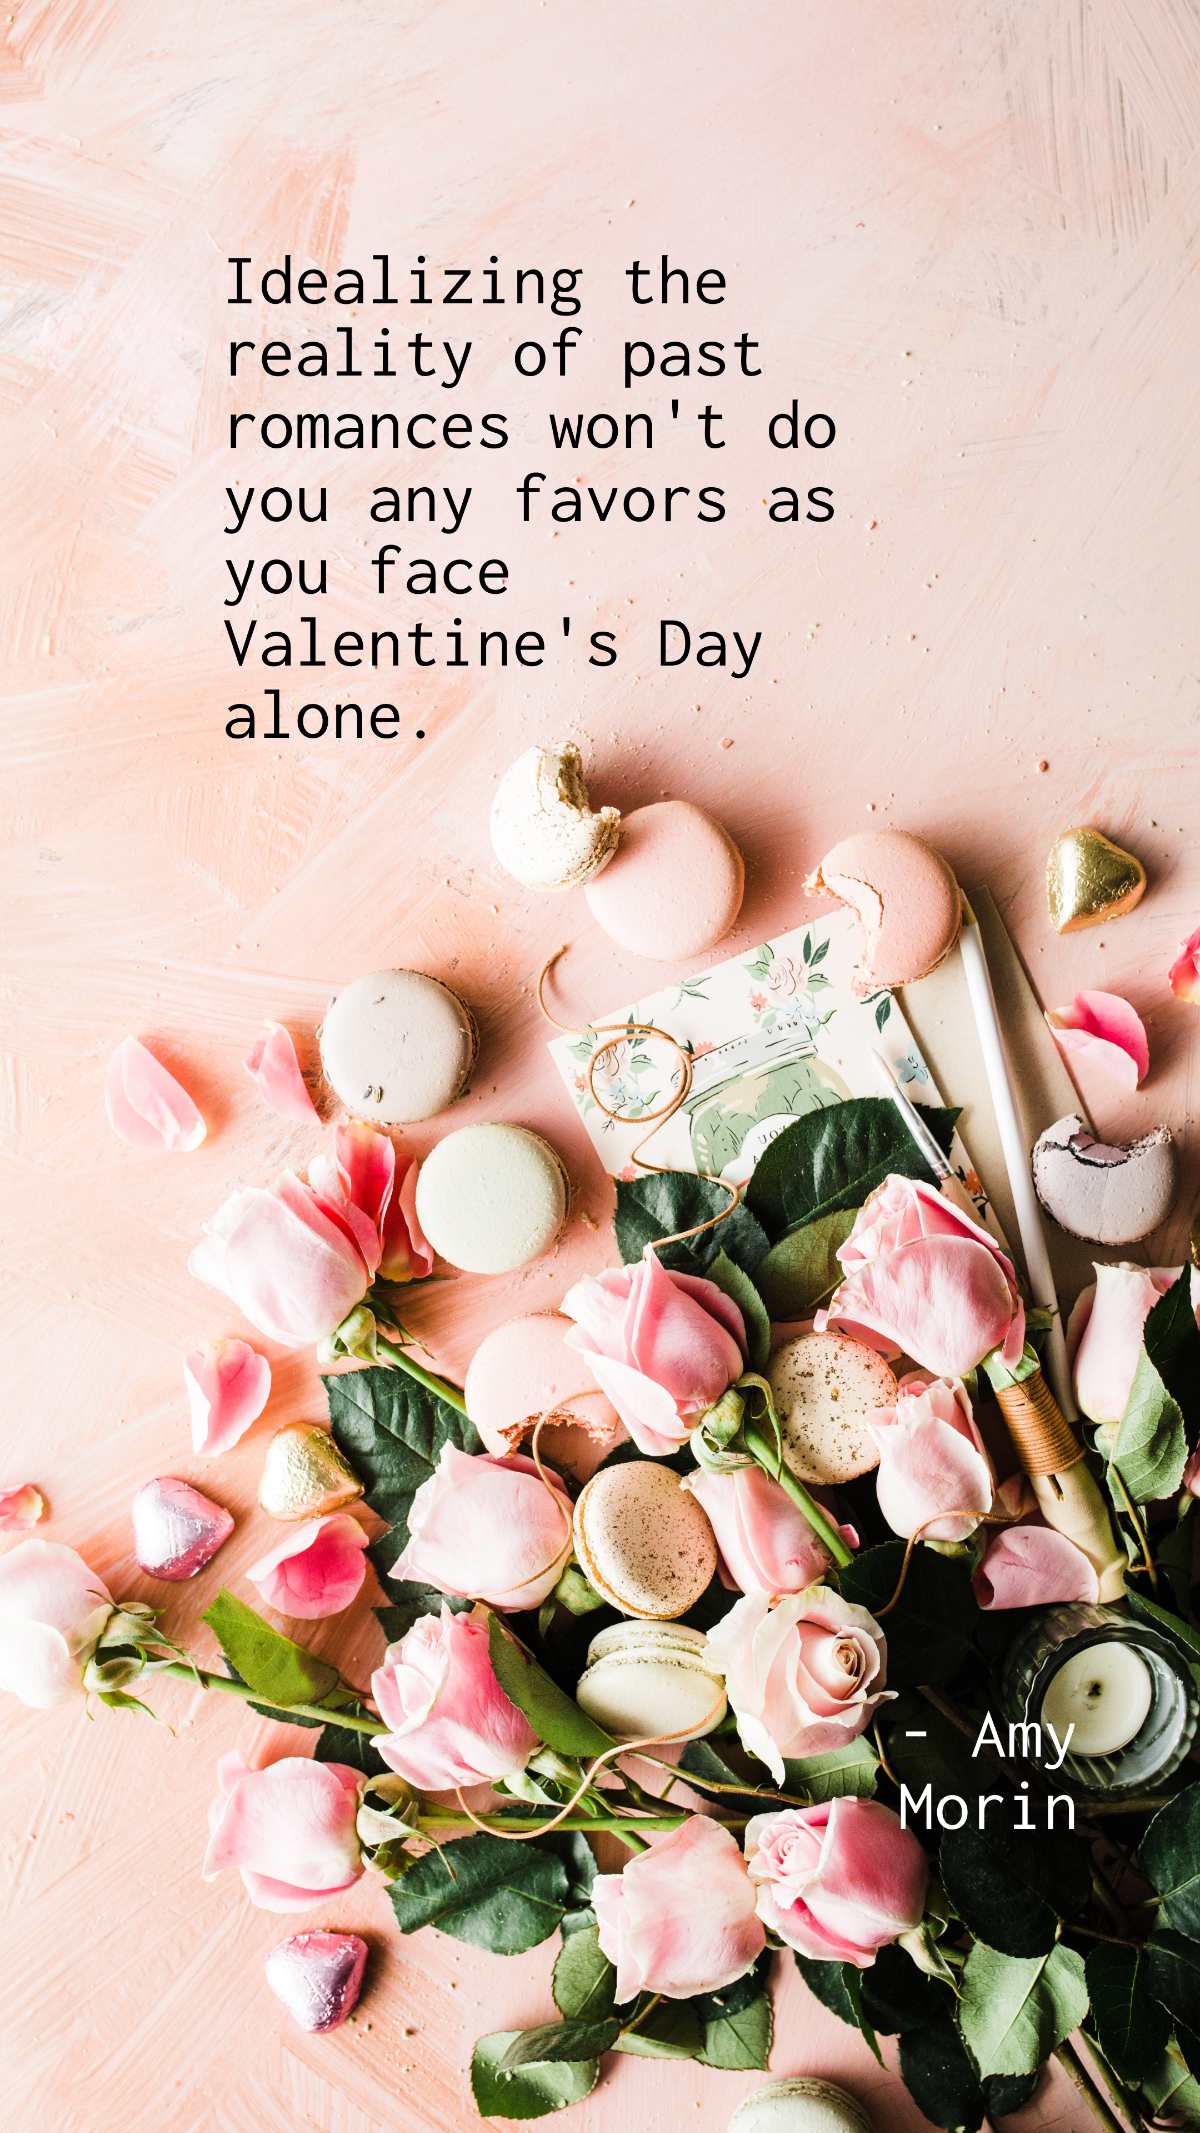 Amy Morin - Idealizing the reality of past romances won't do you any favors as you face Valentine's Day alone. Template